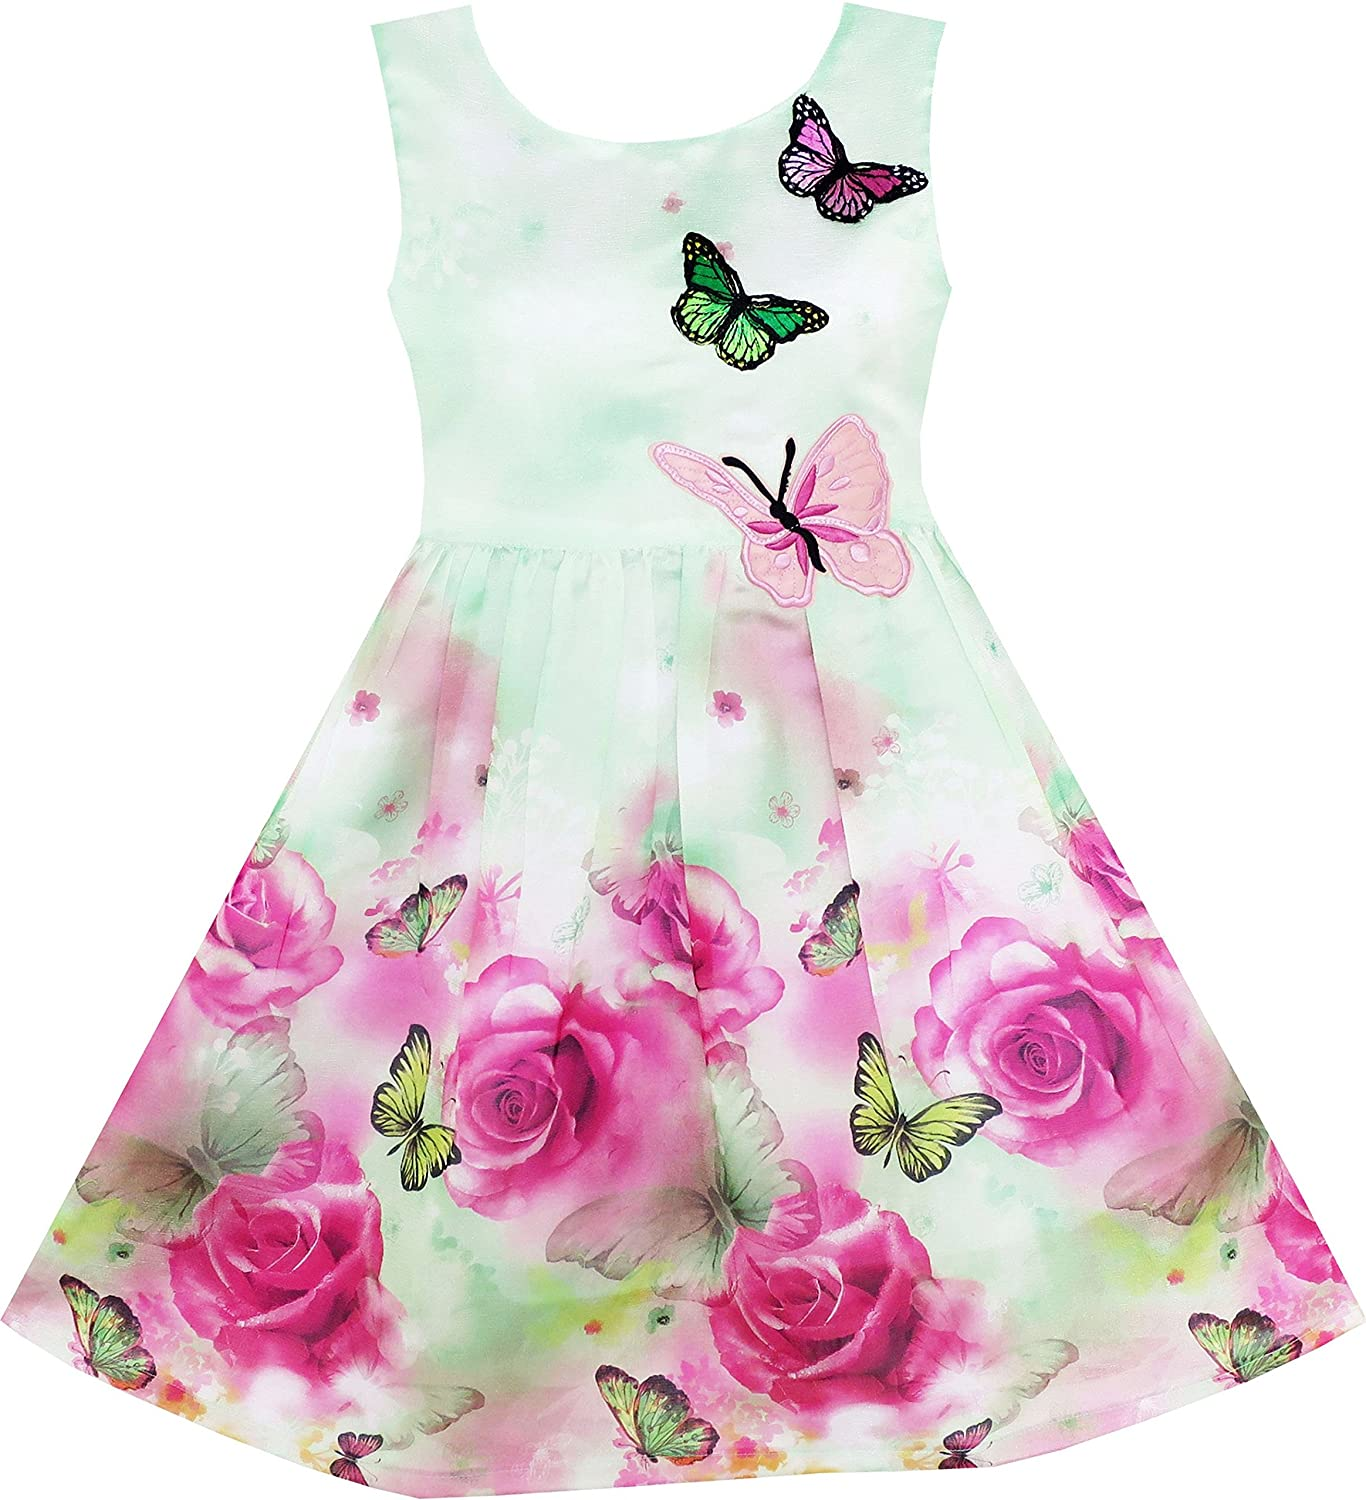 Adorable Rose Flower Printed Dress for Girls - Perfect for Casual Wear